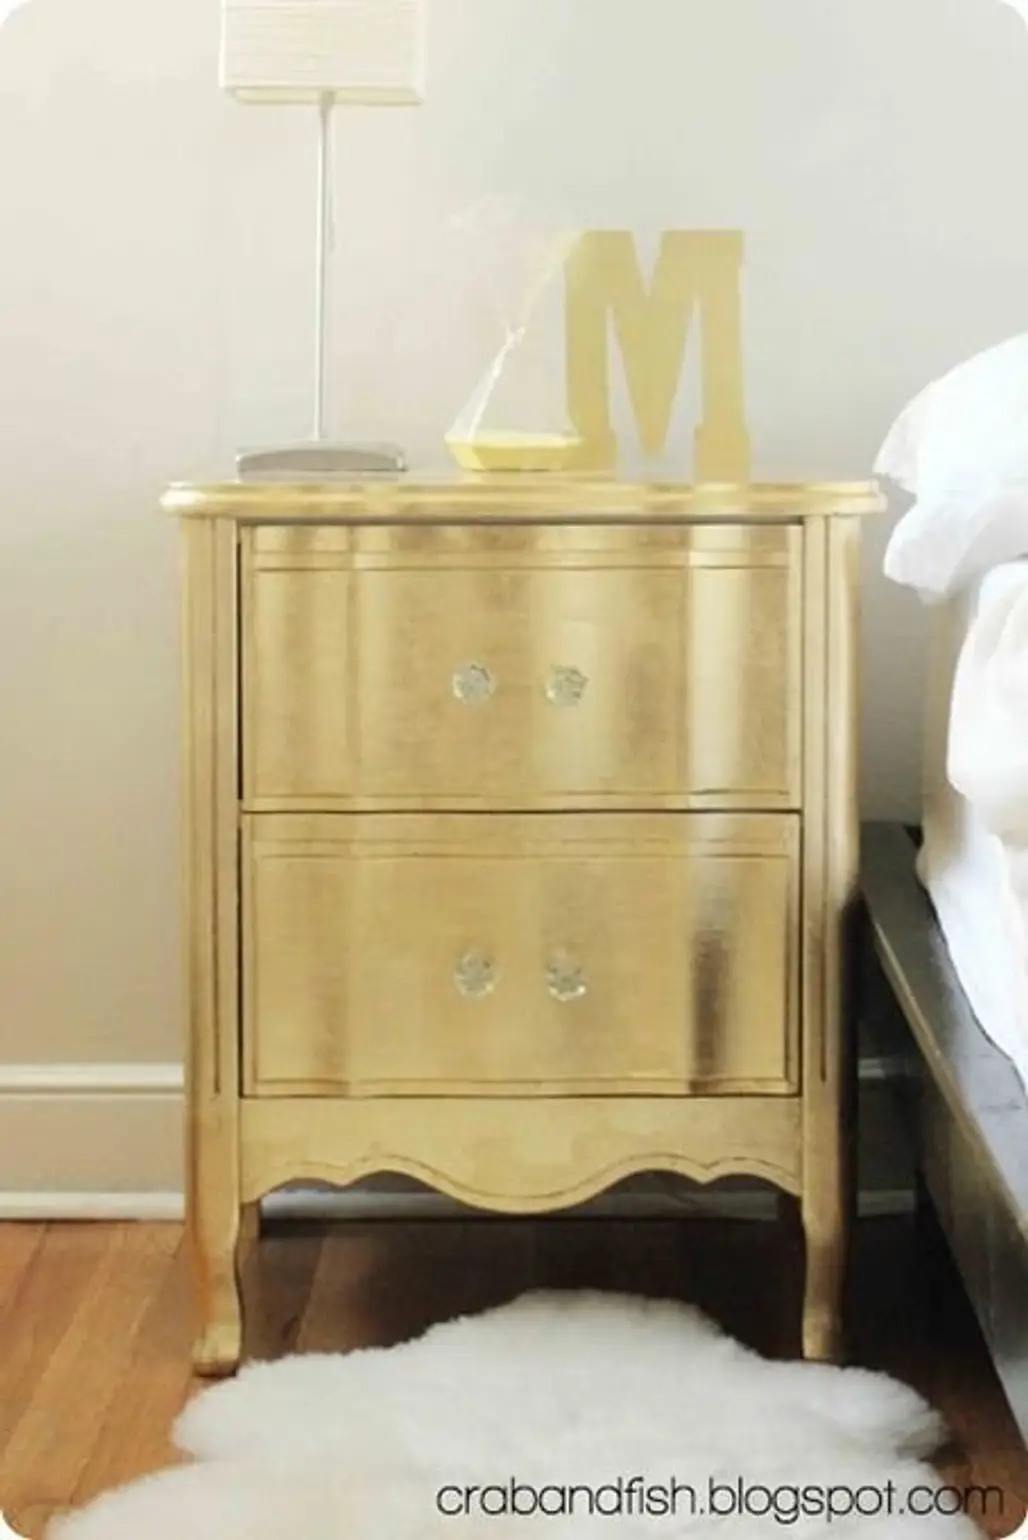 Wowser - Gold Leaf Nightstand - Would You?